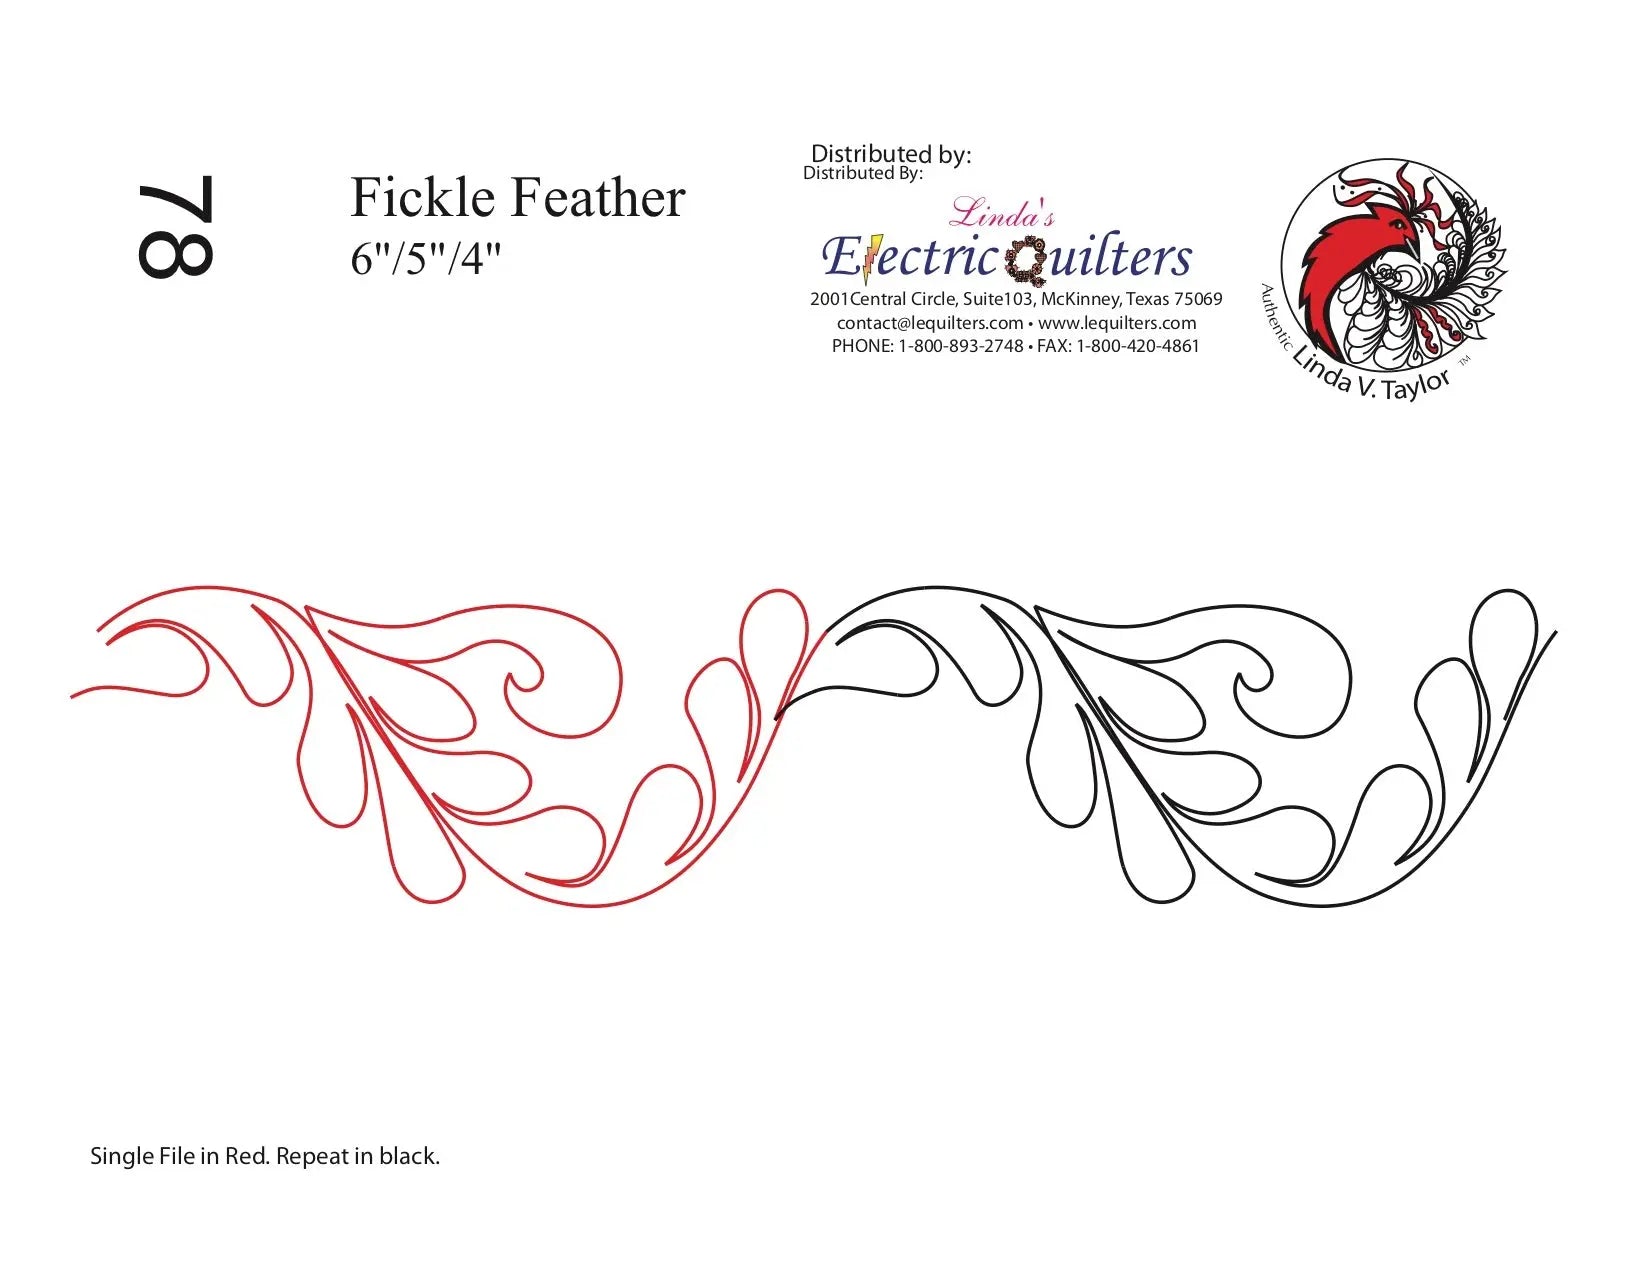 078 Fickle Feather Pantograph by Linda V. Taylor - Linda's Electric Quilters